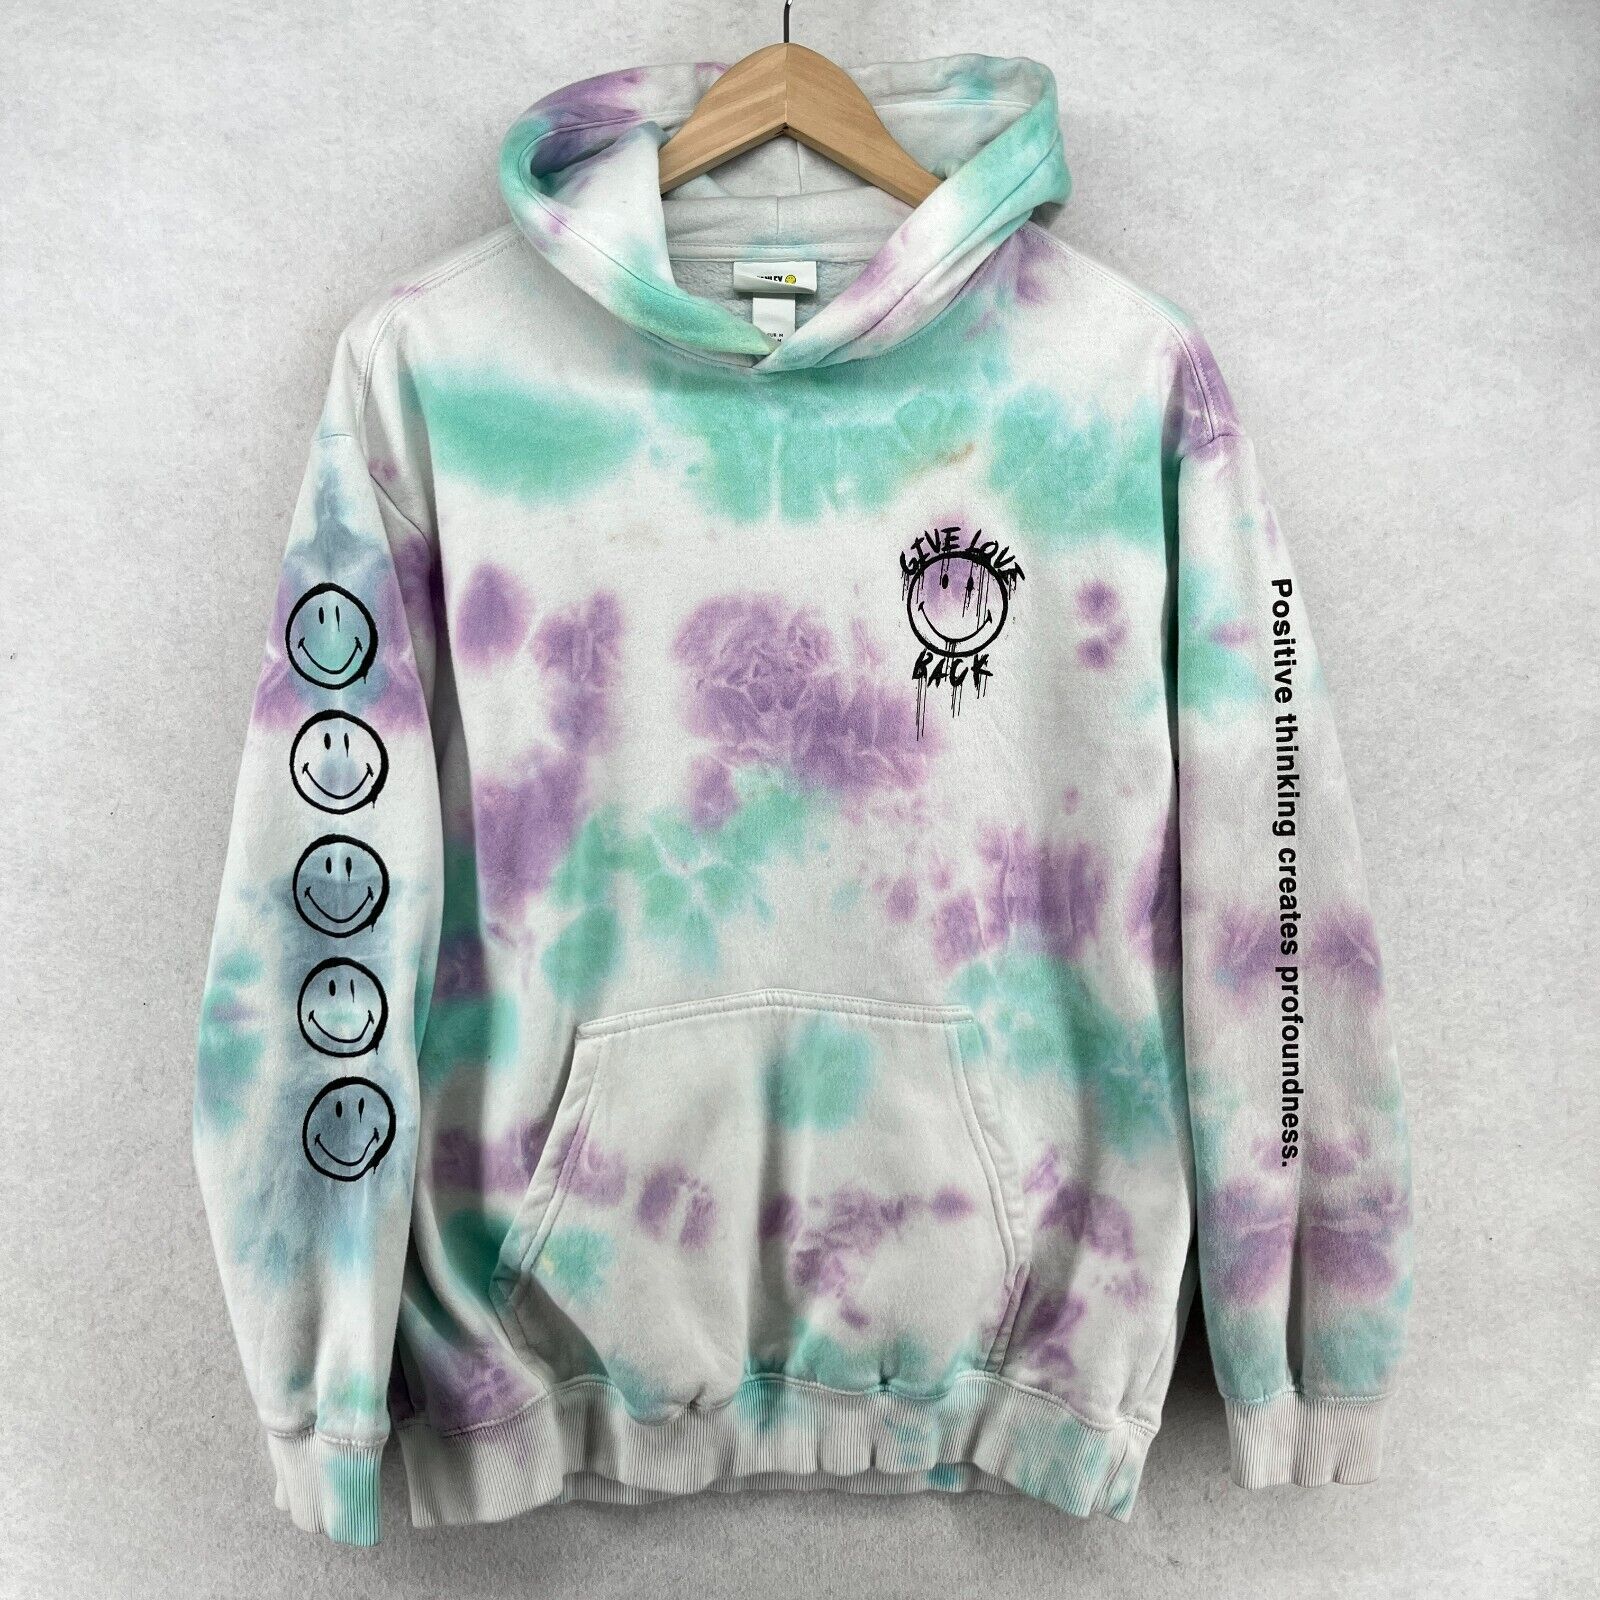 SMILEY X H & M Hoodie Mens M GIVE LOVE BACK Tie Dye Cotton Blend Pullover Purple